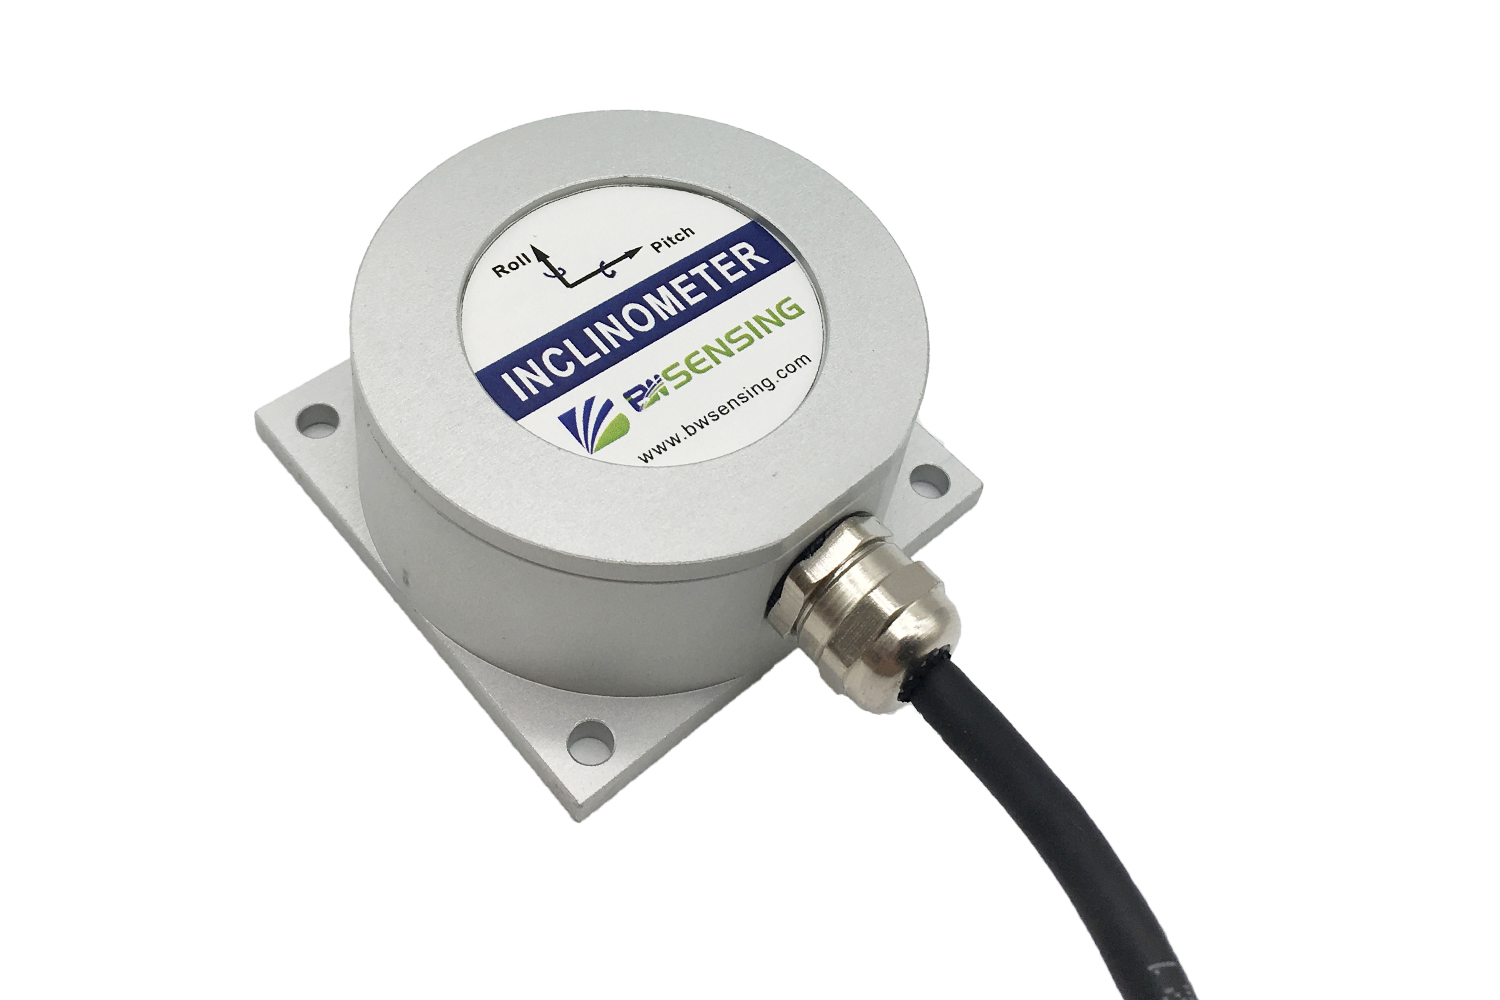 BWSENSING Low-cost CAN Bus Dynamic Inclinometer BW-VG225